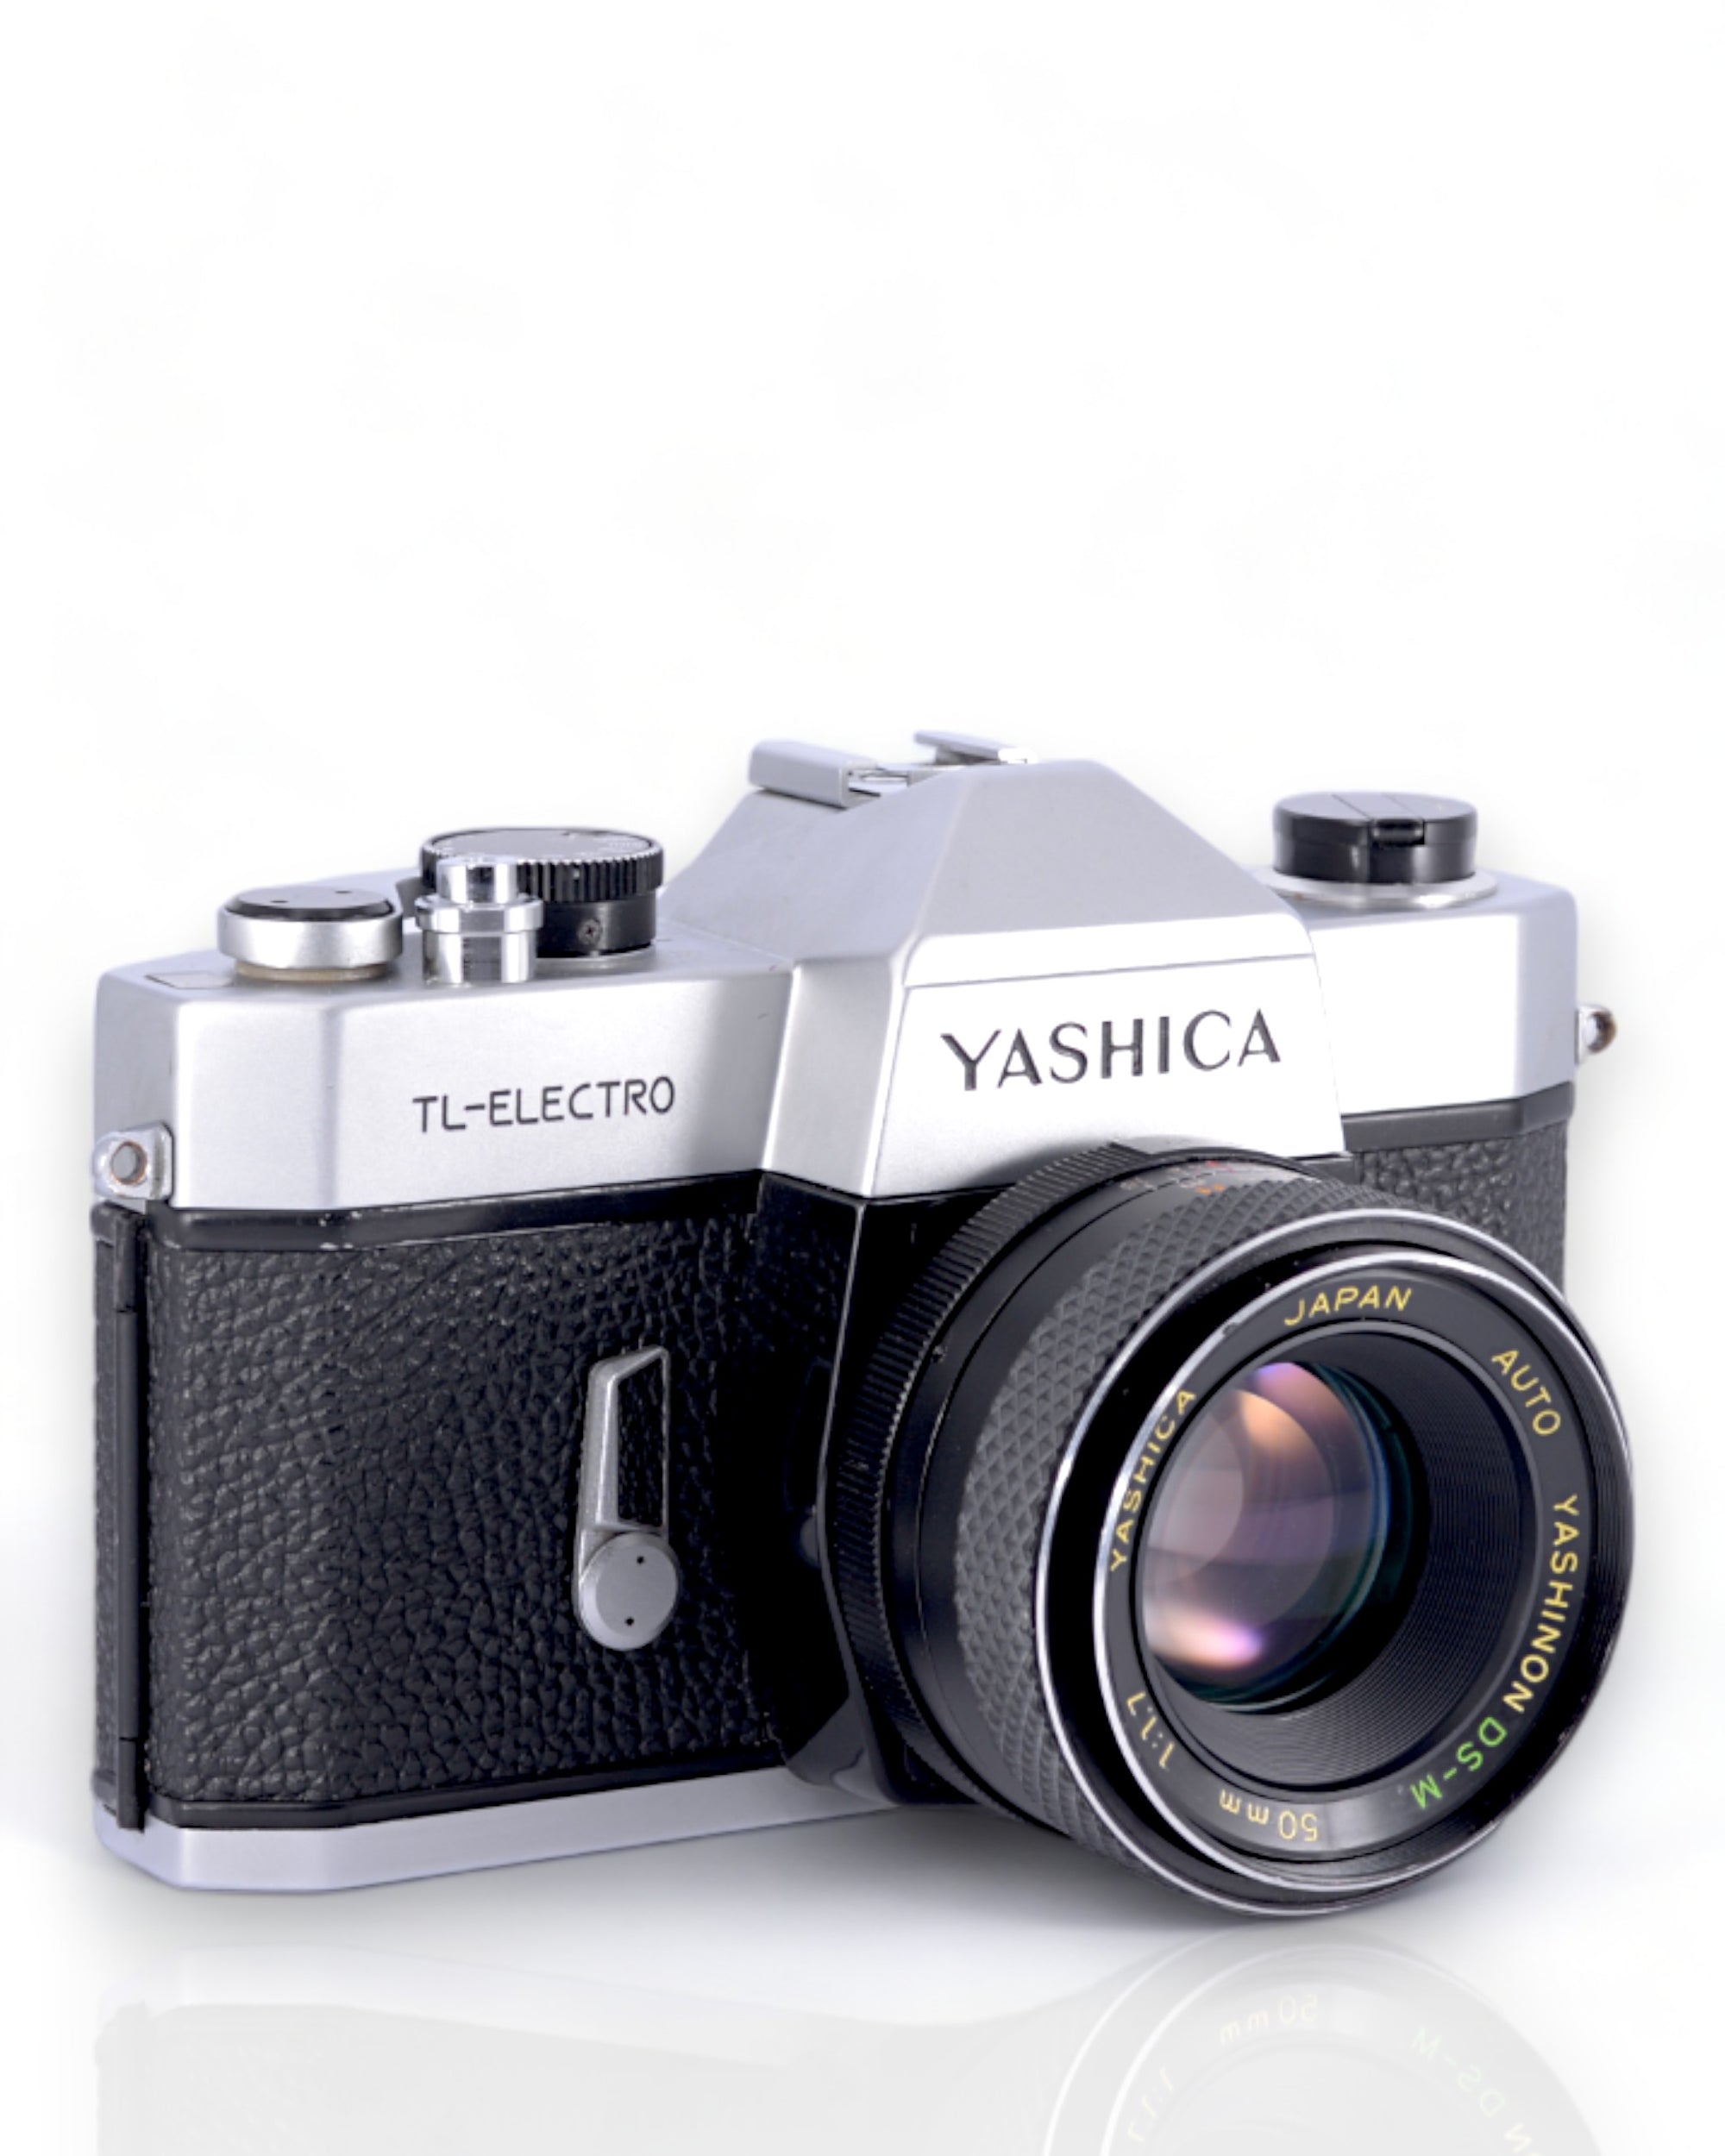 Yashica TL-Electro 35mm SLR film camera with 50mm f1.7 lens